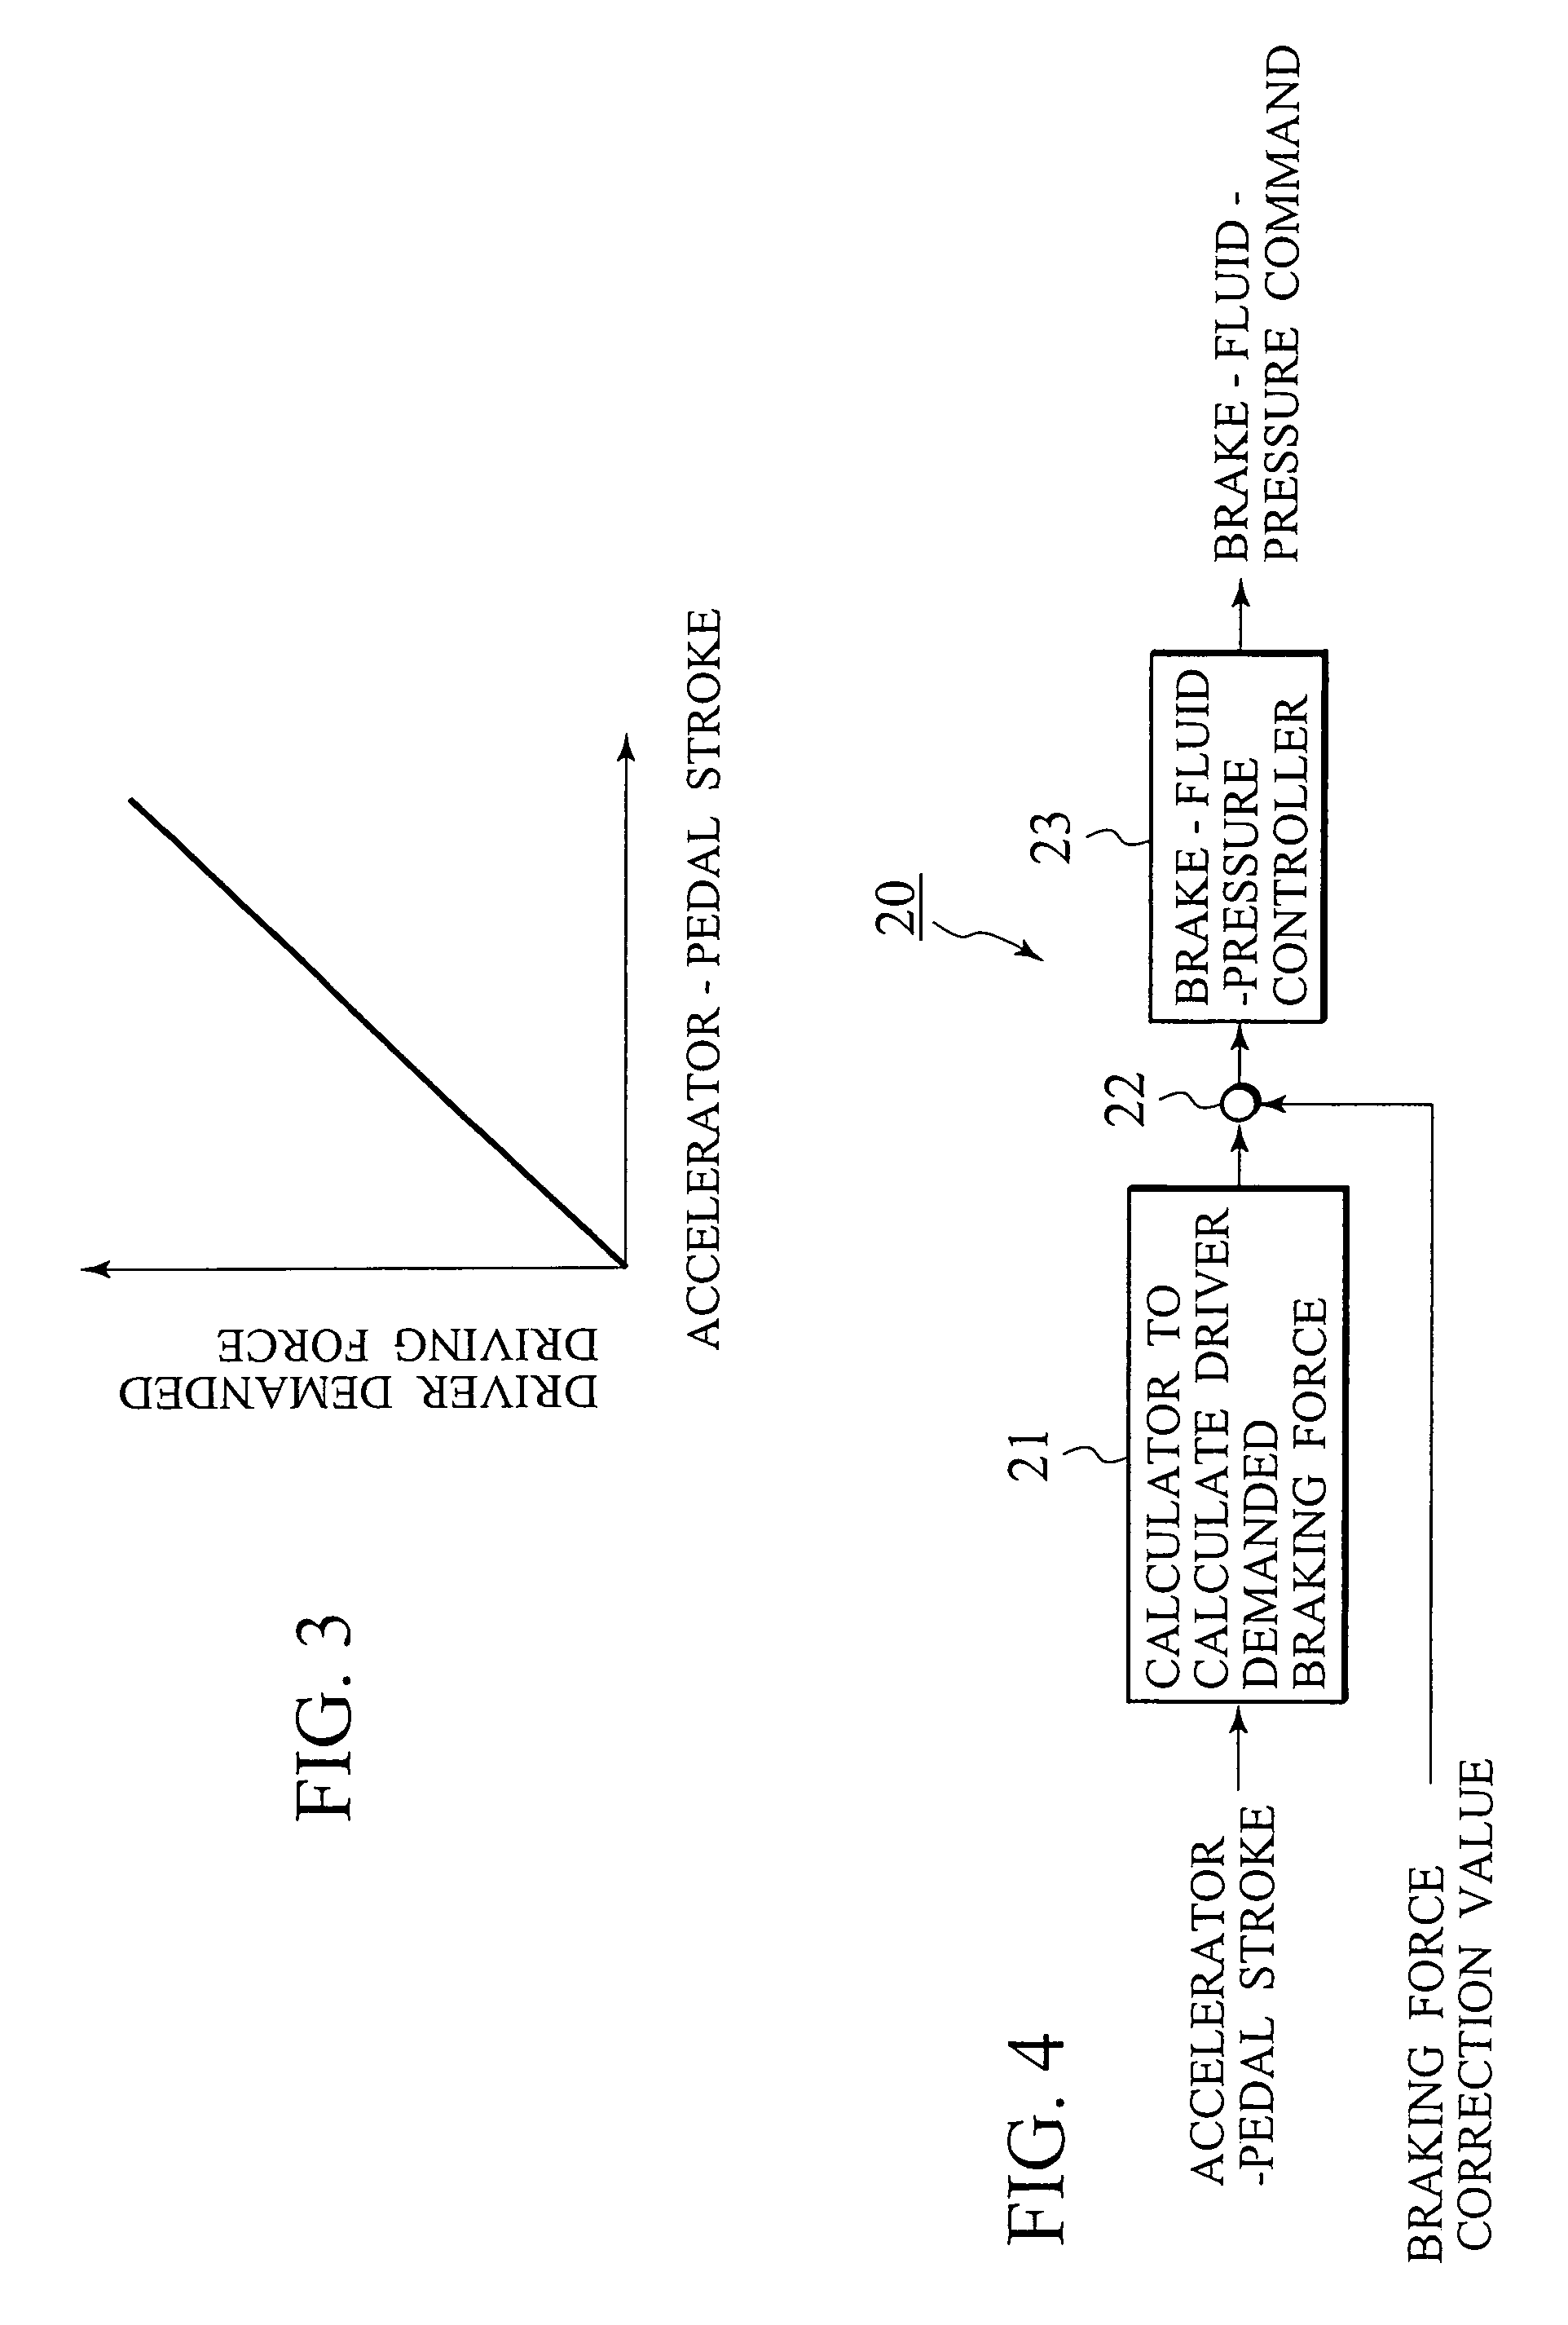 Information providing apparatus for a vehicle